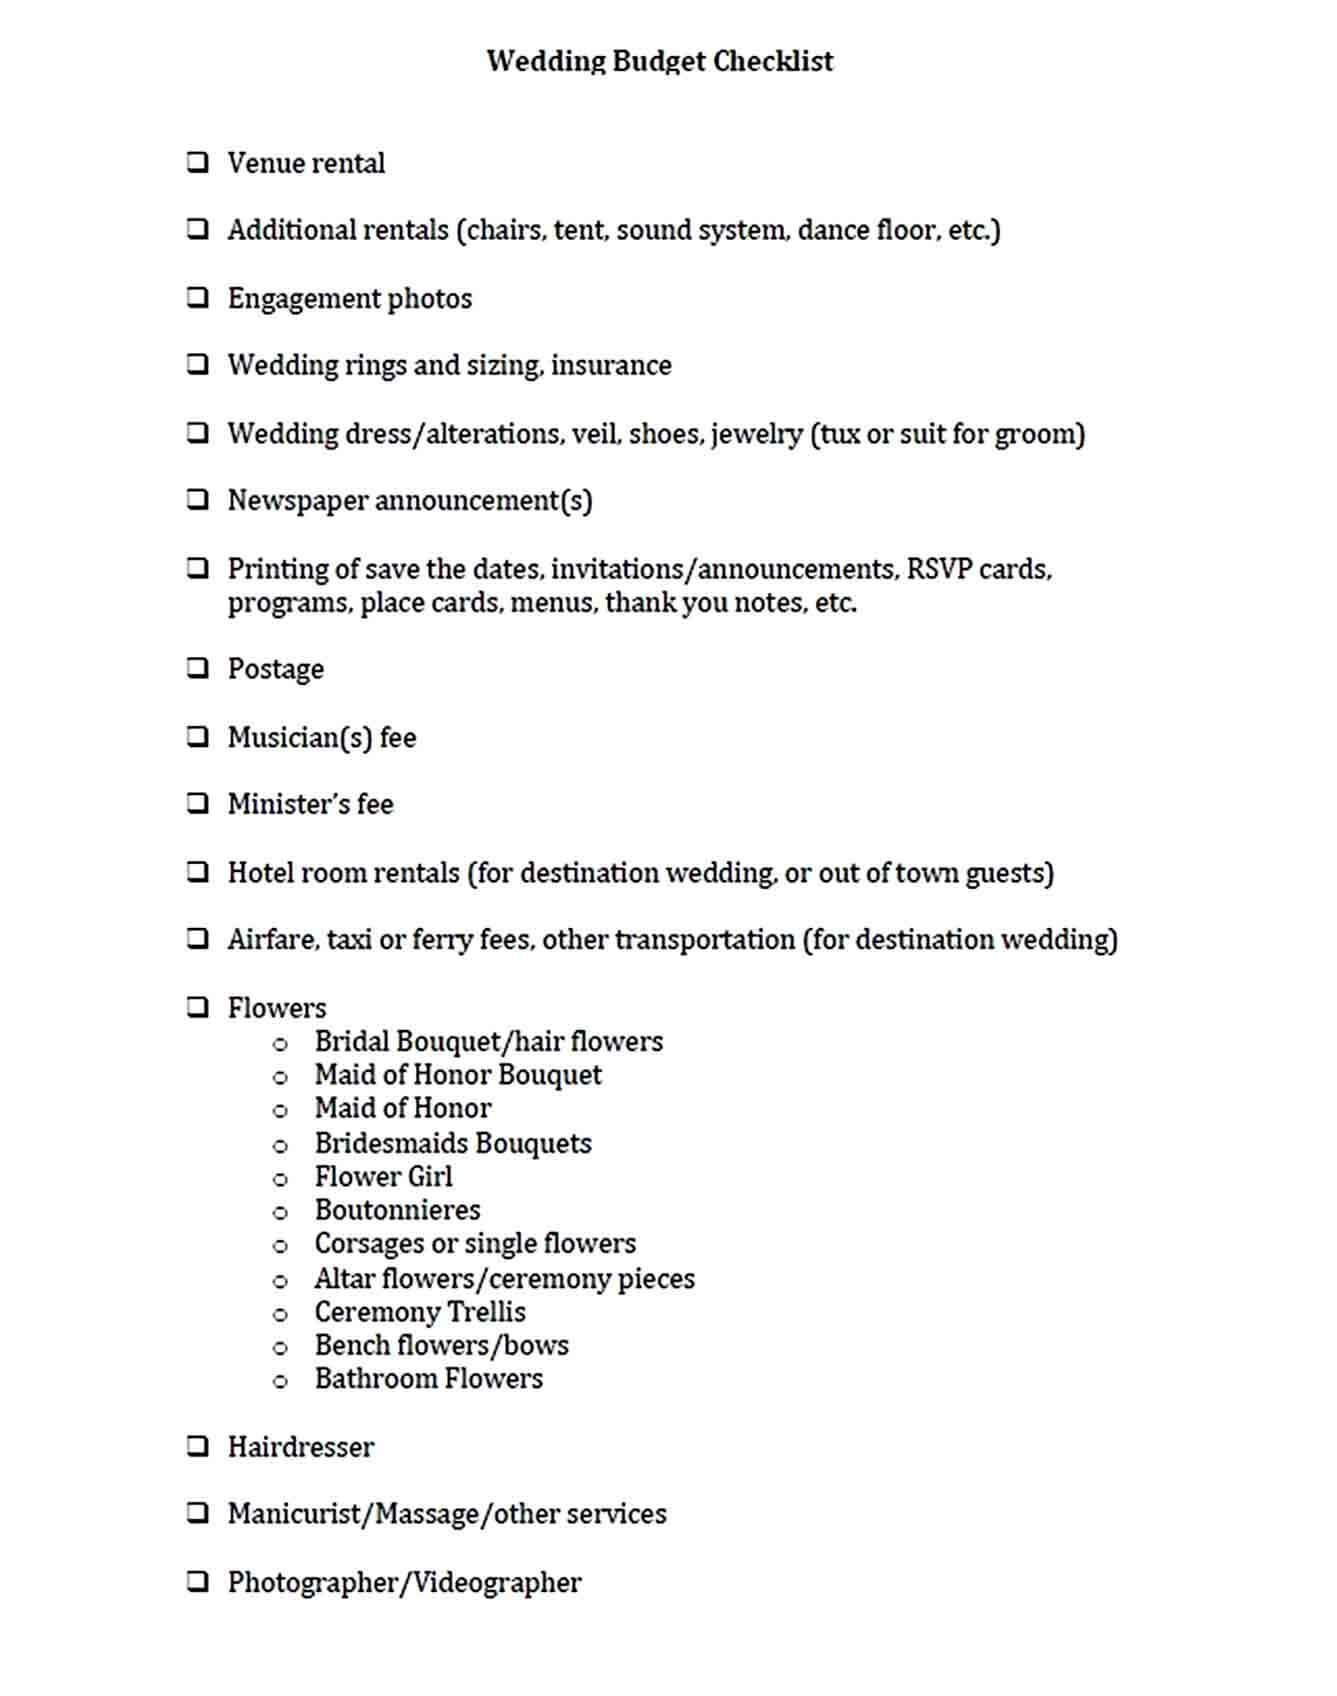 Wedding Budget Checklist Template For Download